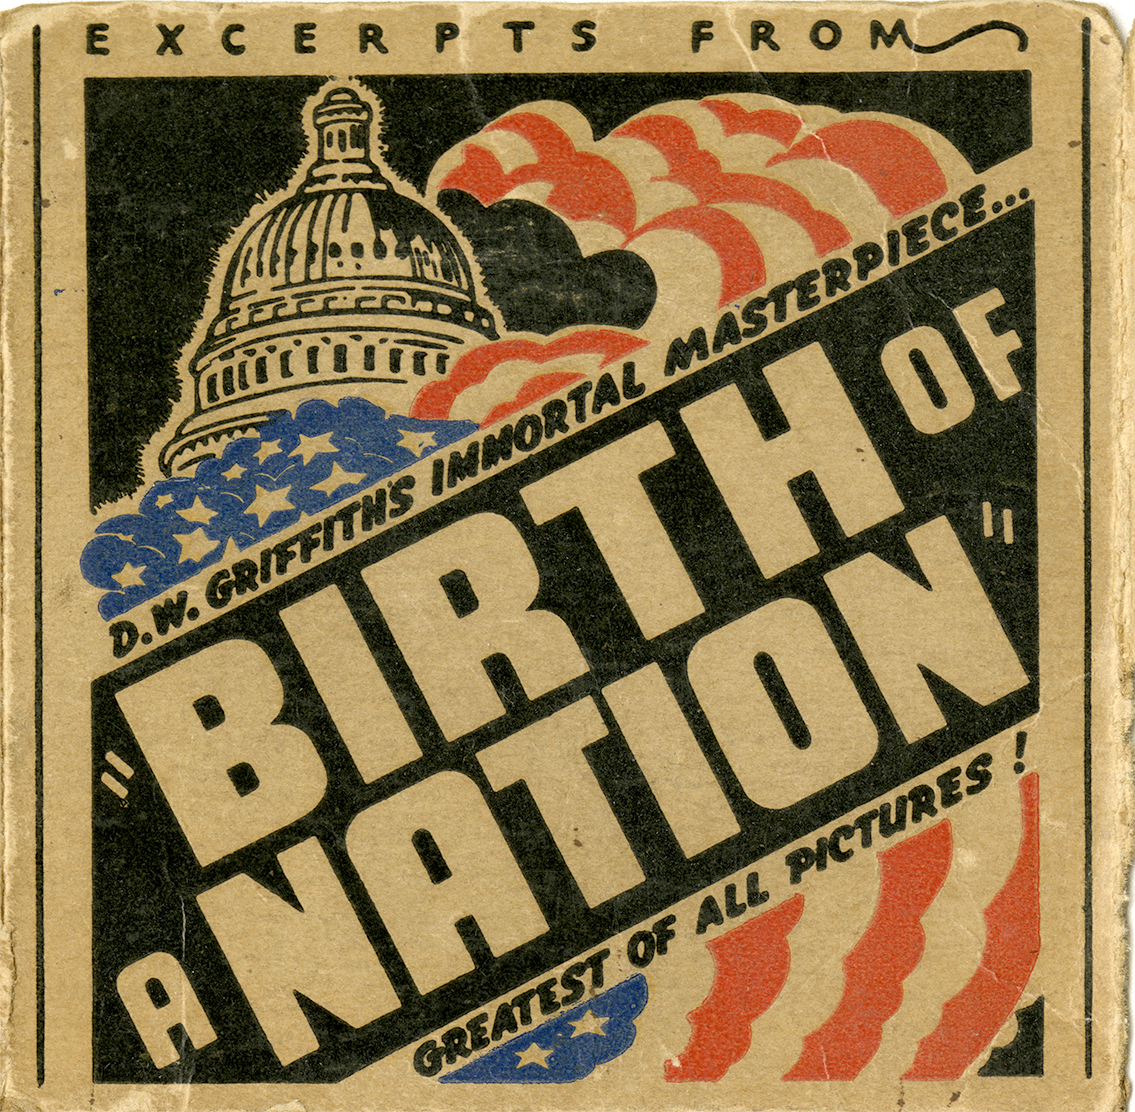 MoMA  D. W. Griffith's The Birth of a Nation